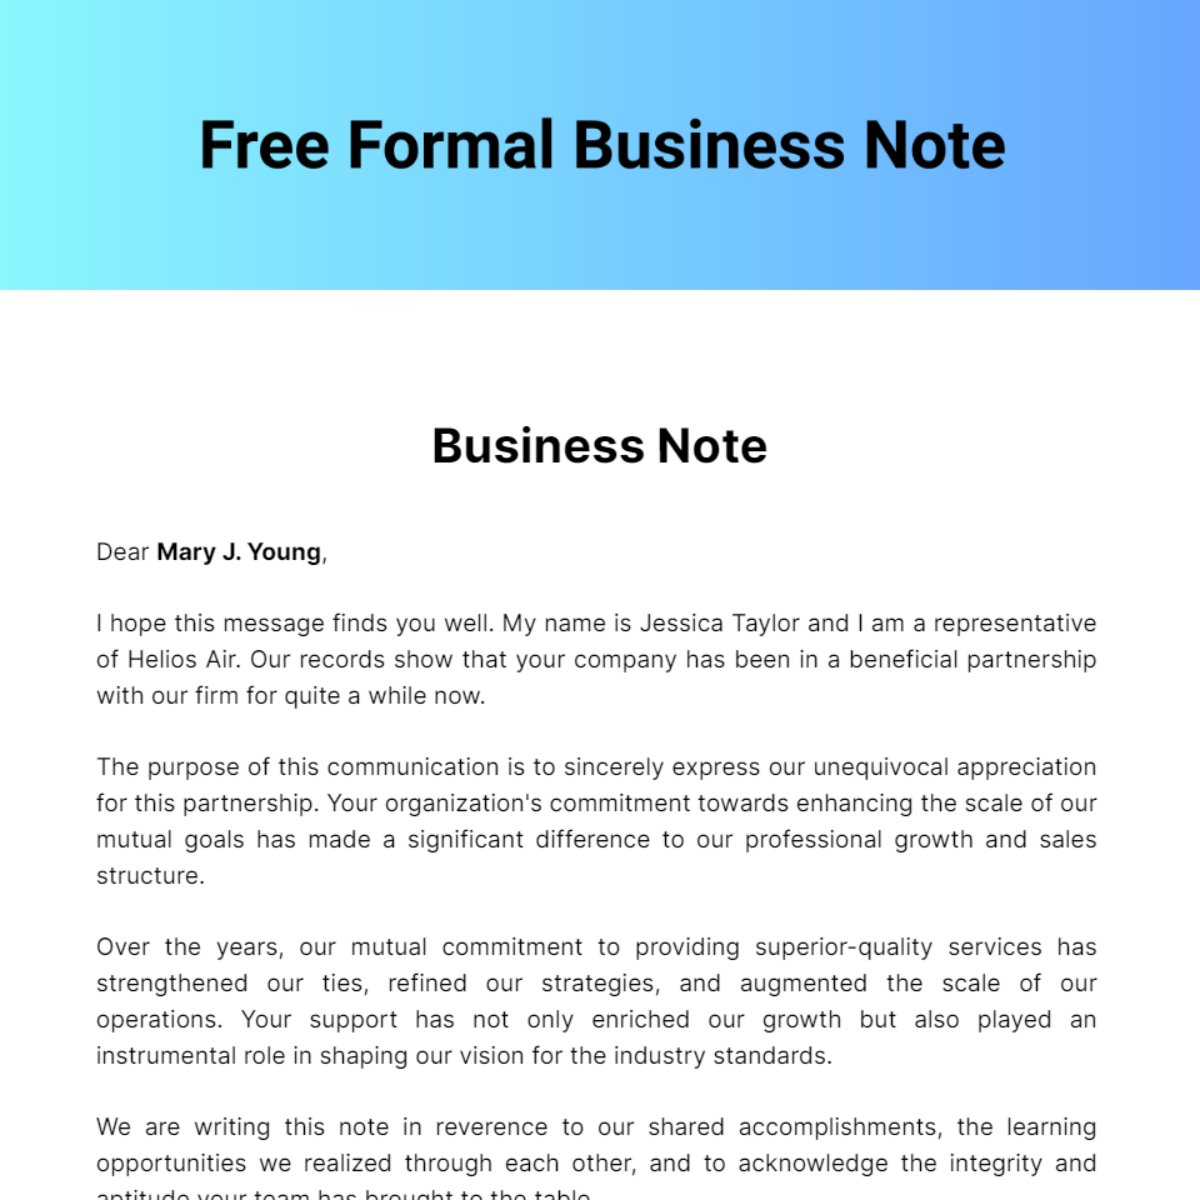 Free Formal Business Note Template